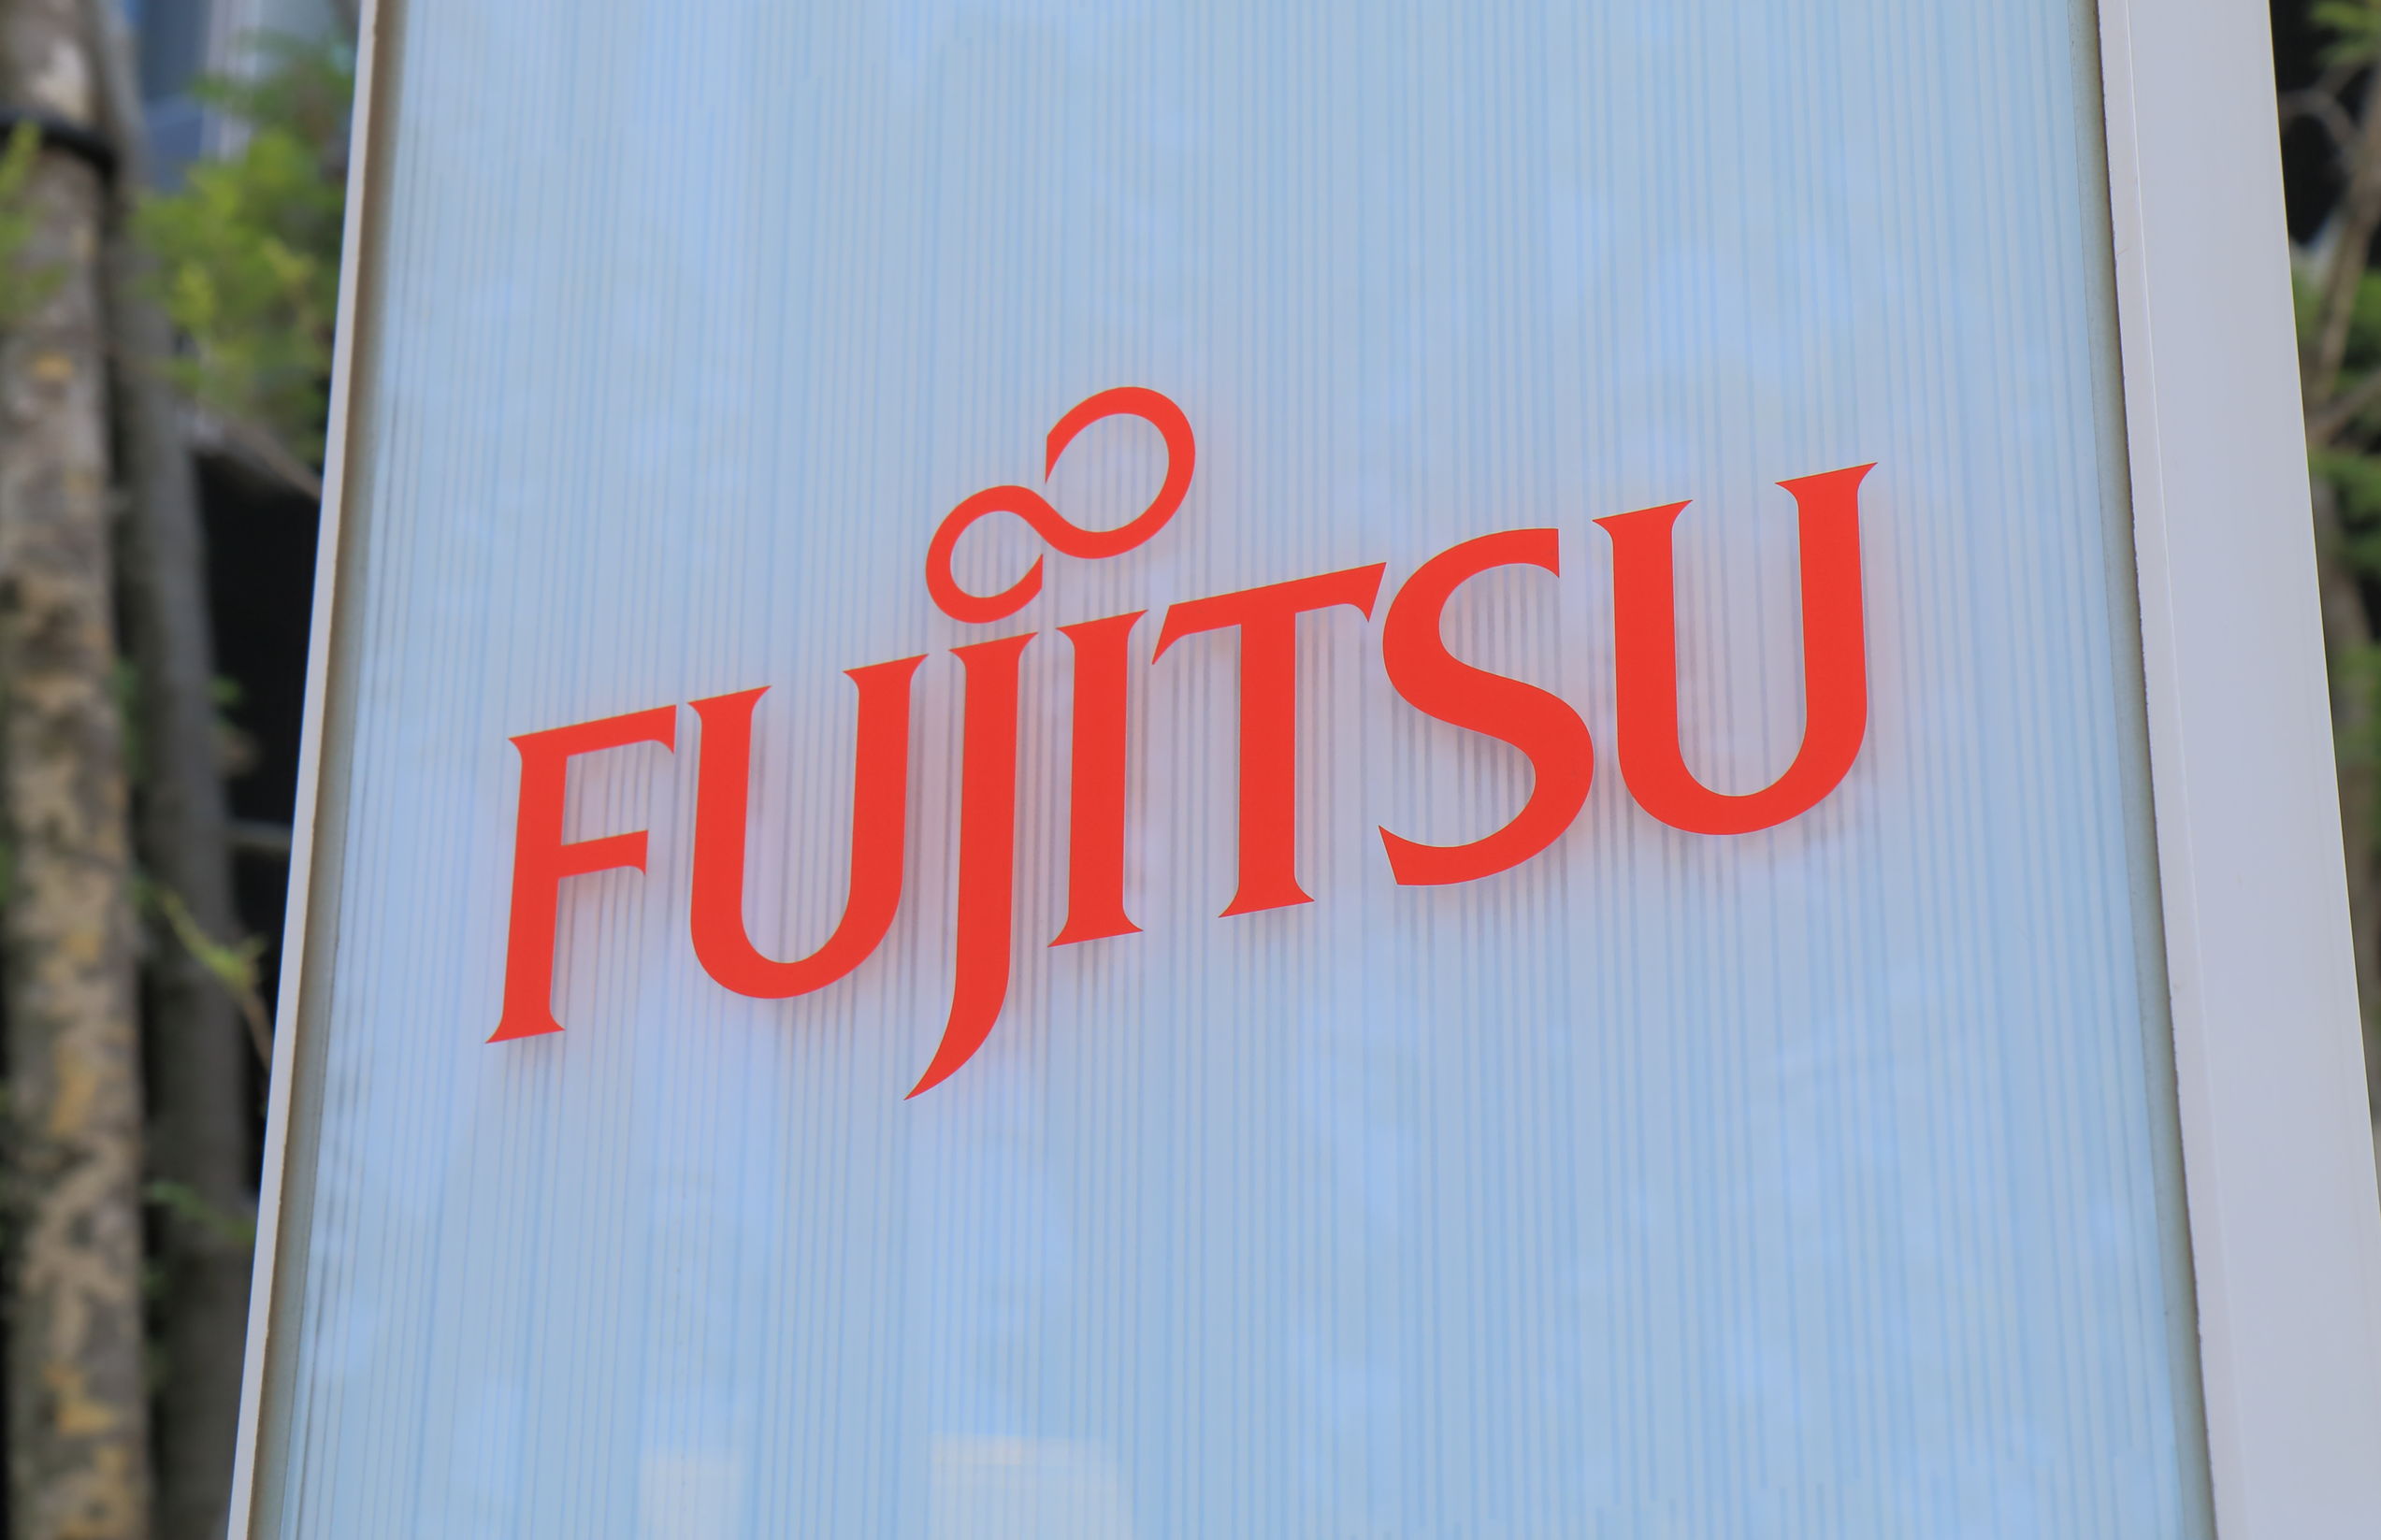 Fujitsu offers 3 core principles for remote working | HRM Asia : HRM Asia